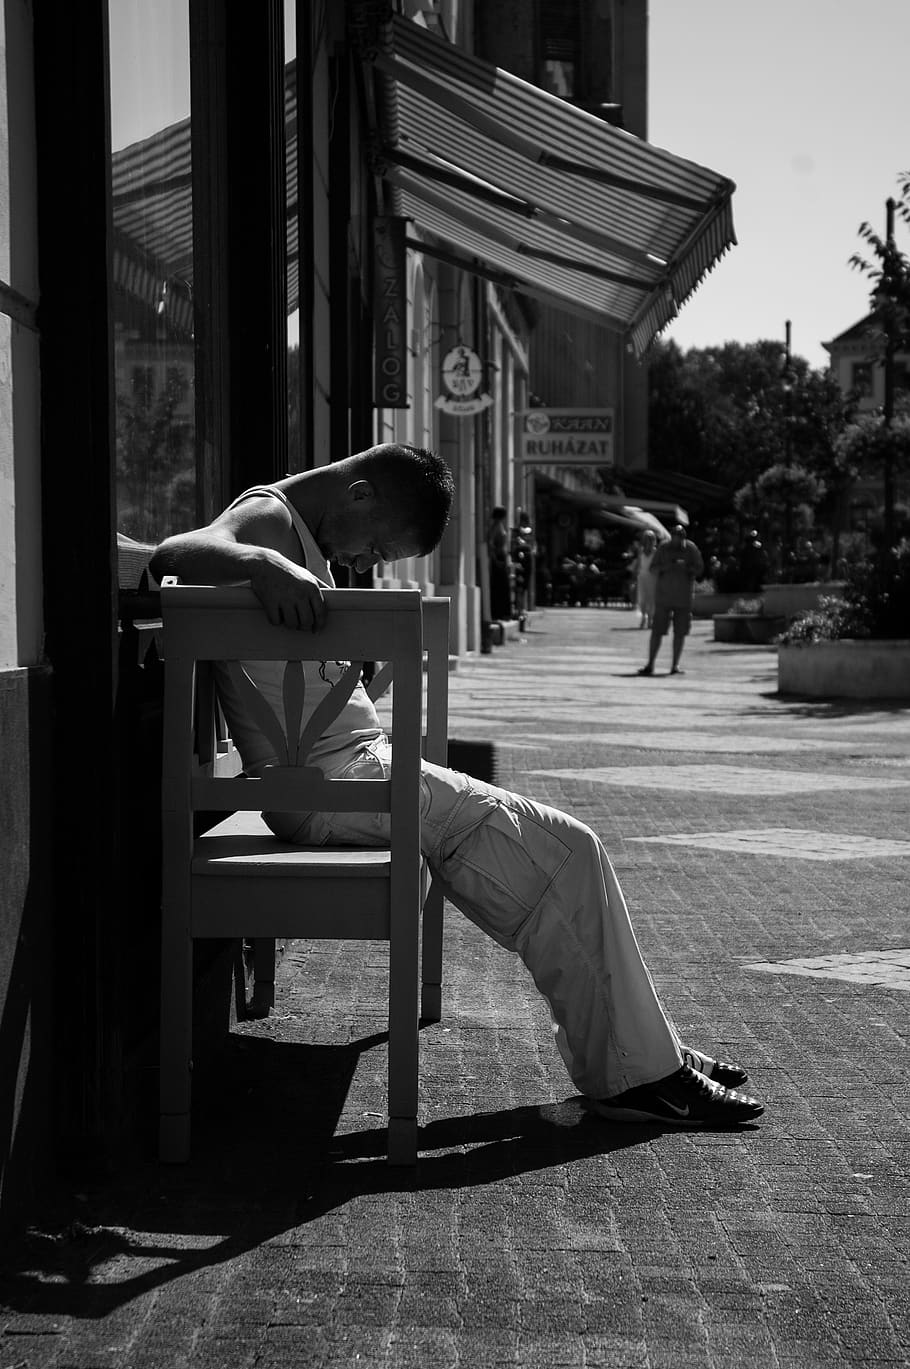 HD wallpaper hangover black and white are you tired of urban mens  outdoor  Wallpaper Flare